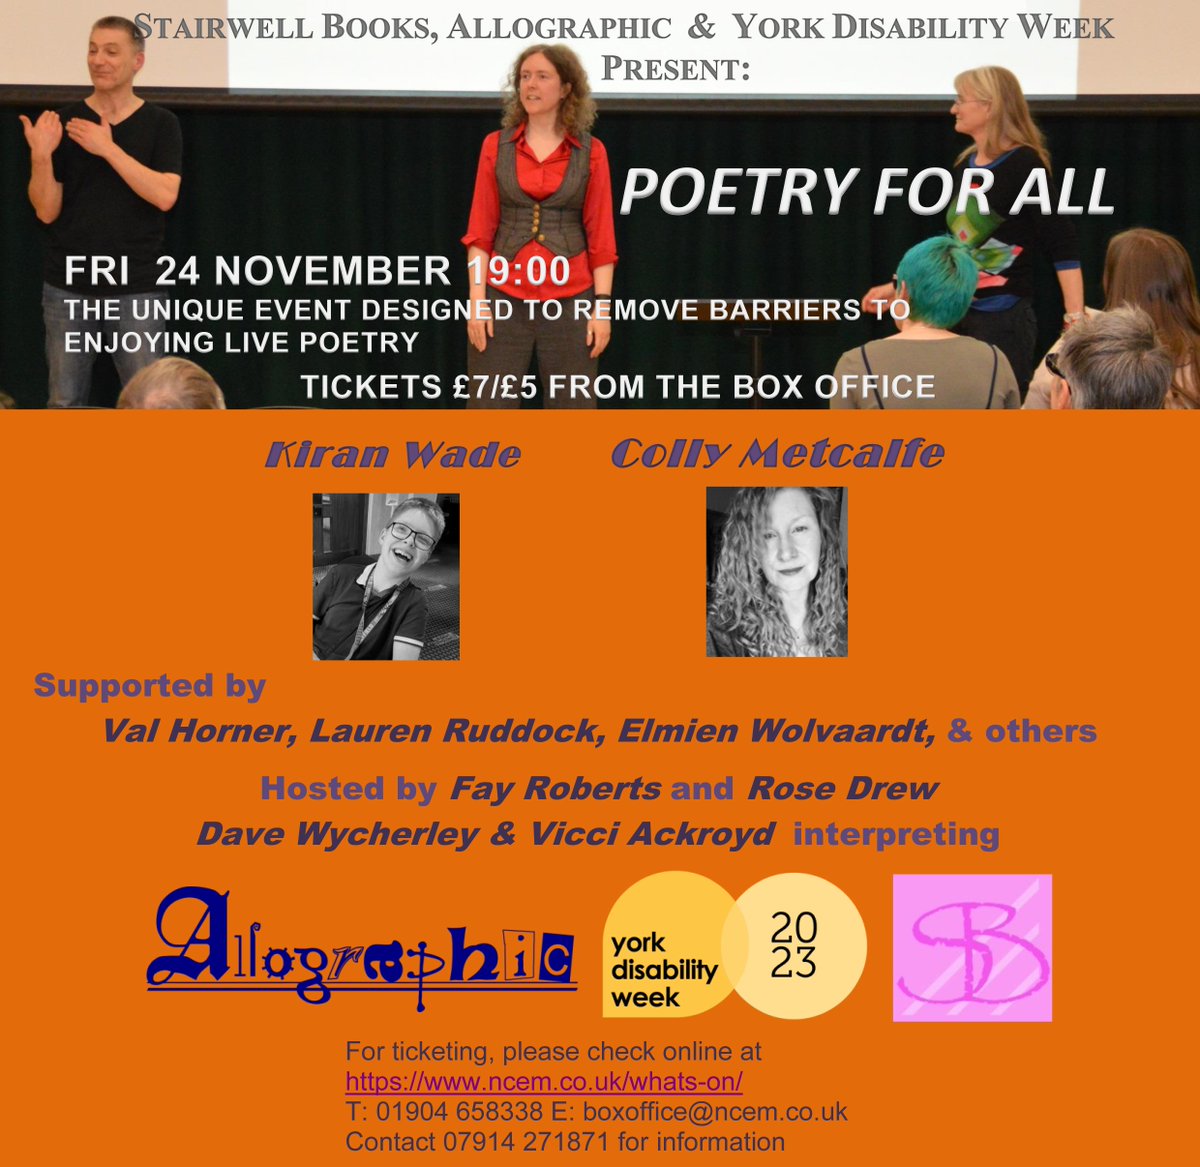 This image makes us all happier! Updated logos, PR pics okayed, & another TRULY WONDERFUL
@PoetryForAllUK  is coming your way, York! @YorkStJohn @YorkHumanRights @yorkearlymusic
@fayroberts  #DeafArts #poetrycommunity #York @YorkDisability @allographica
@KiranWontShutUp